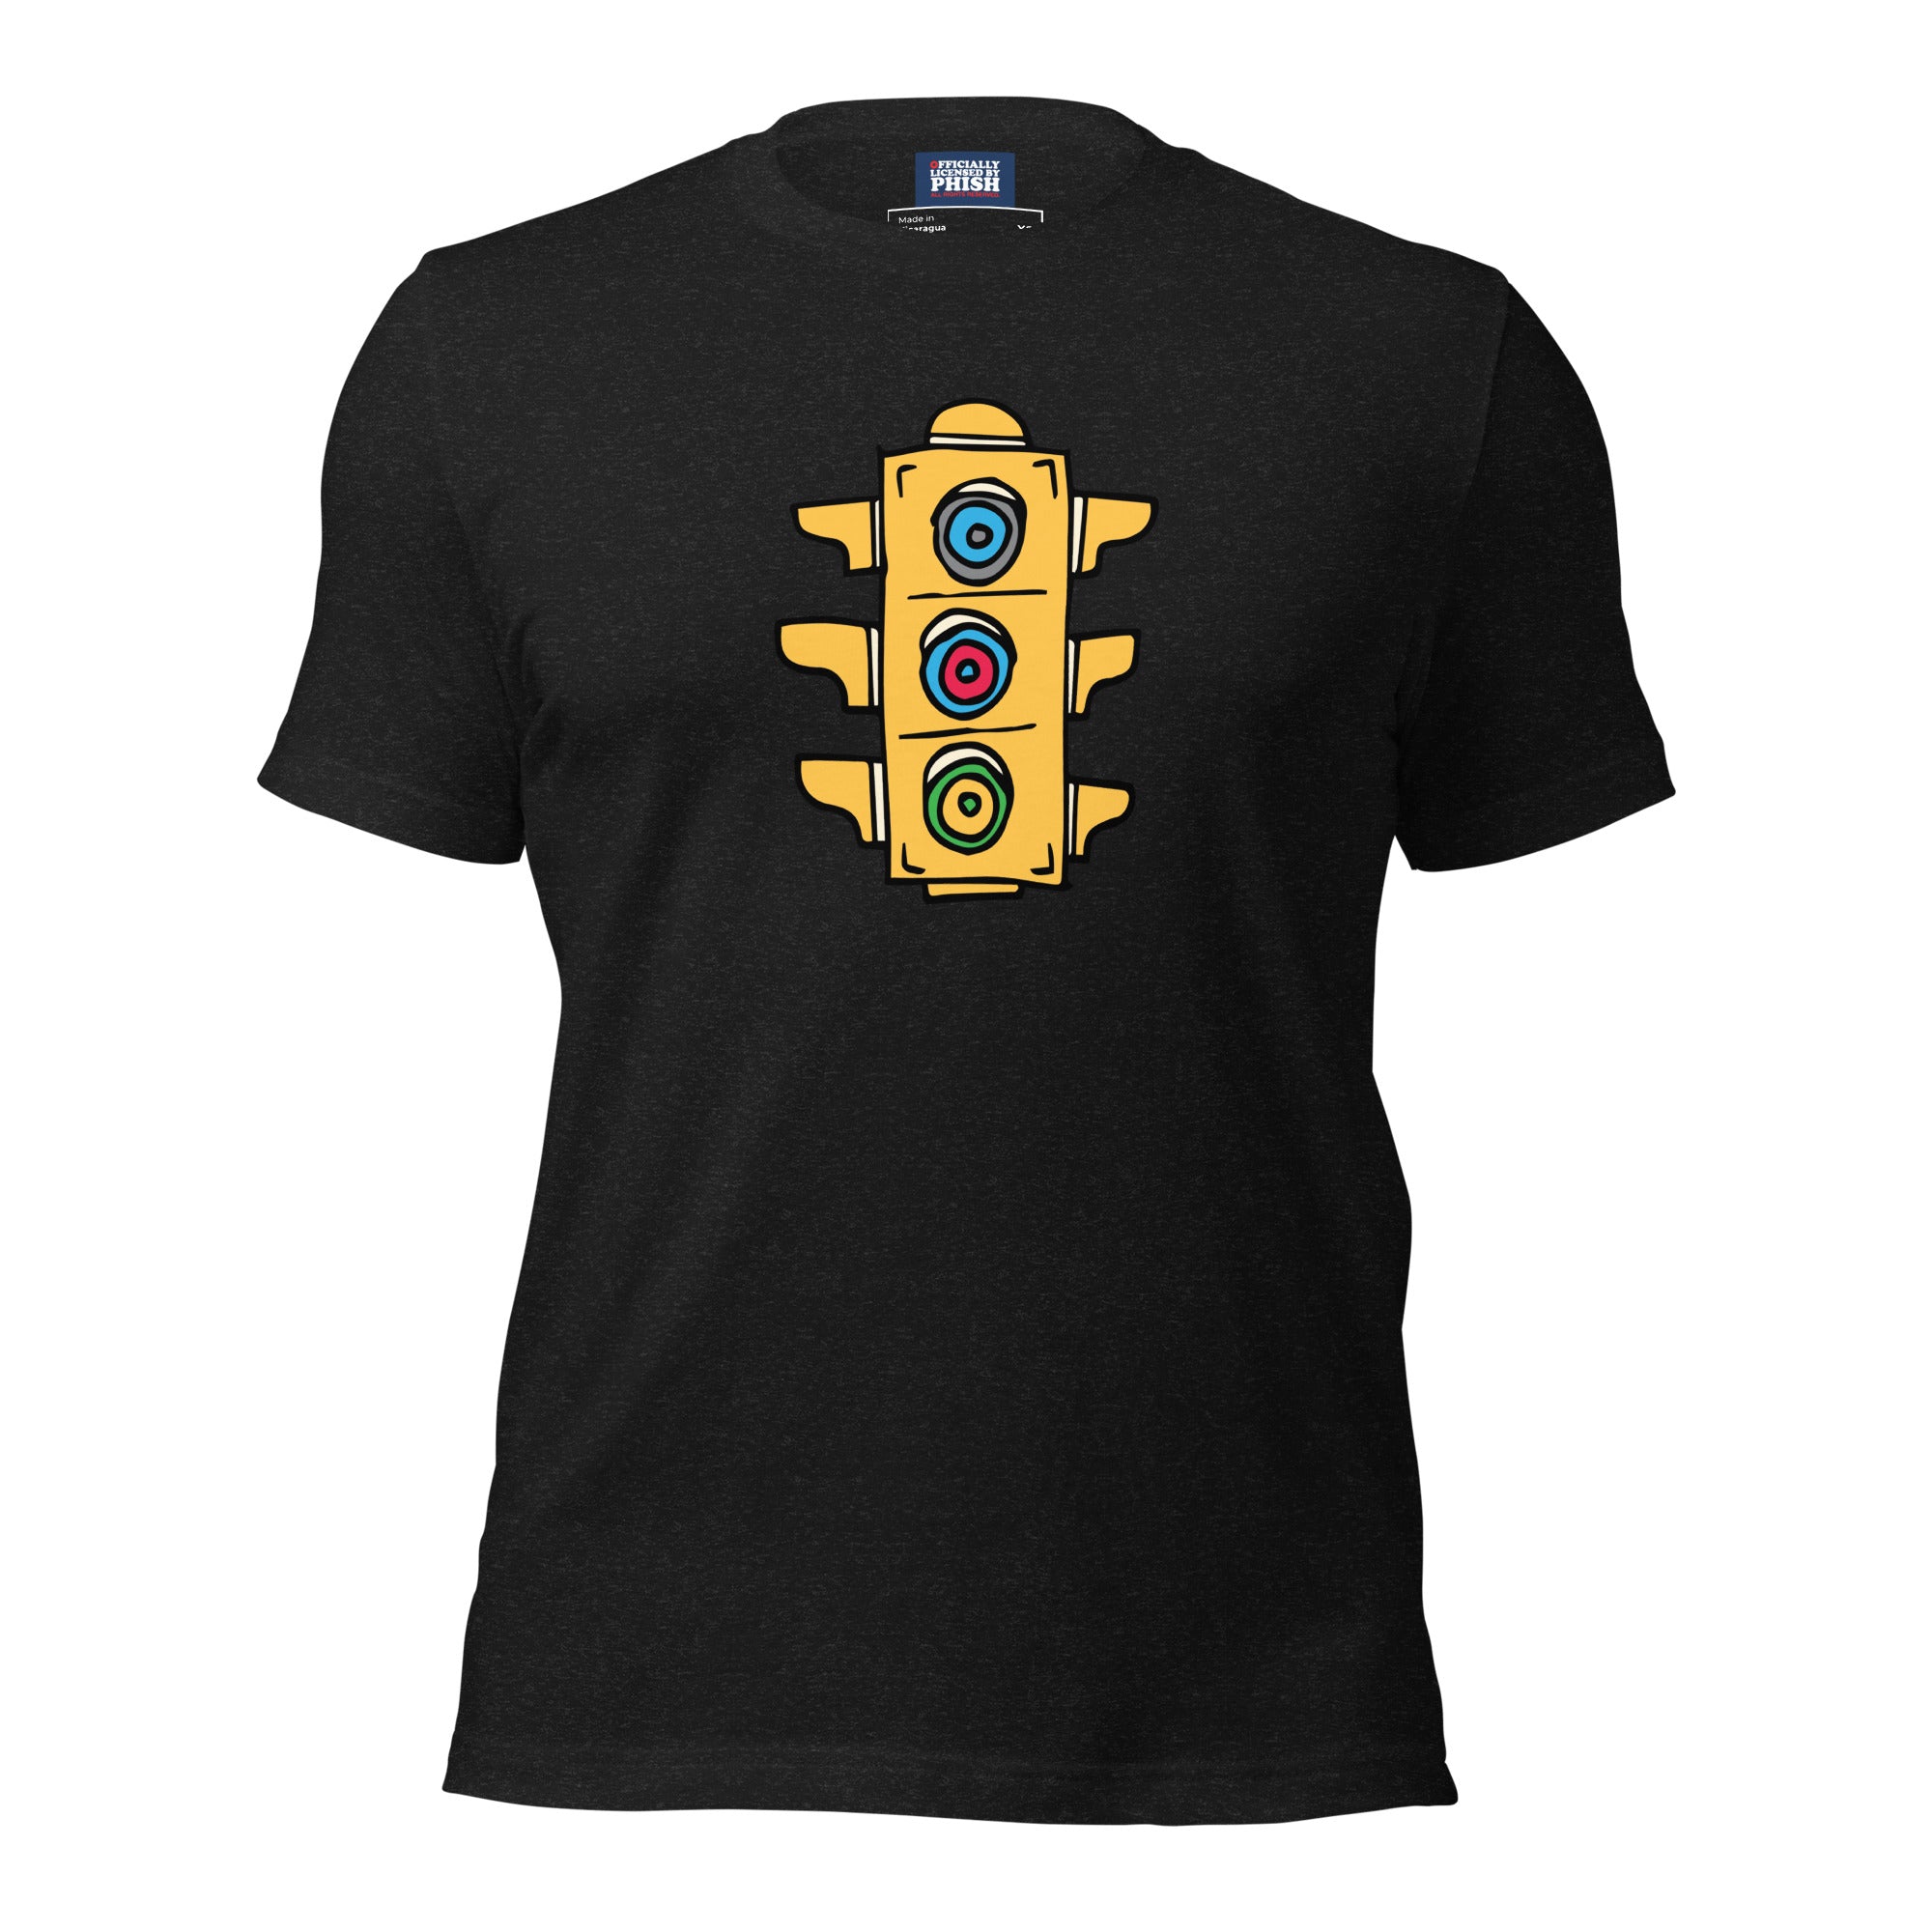 Traffic Light Donuts Tee Black Heather - Section 119